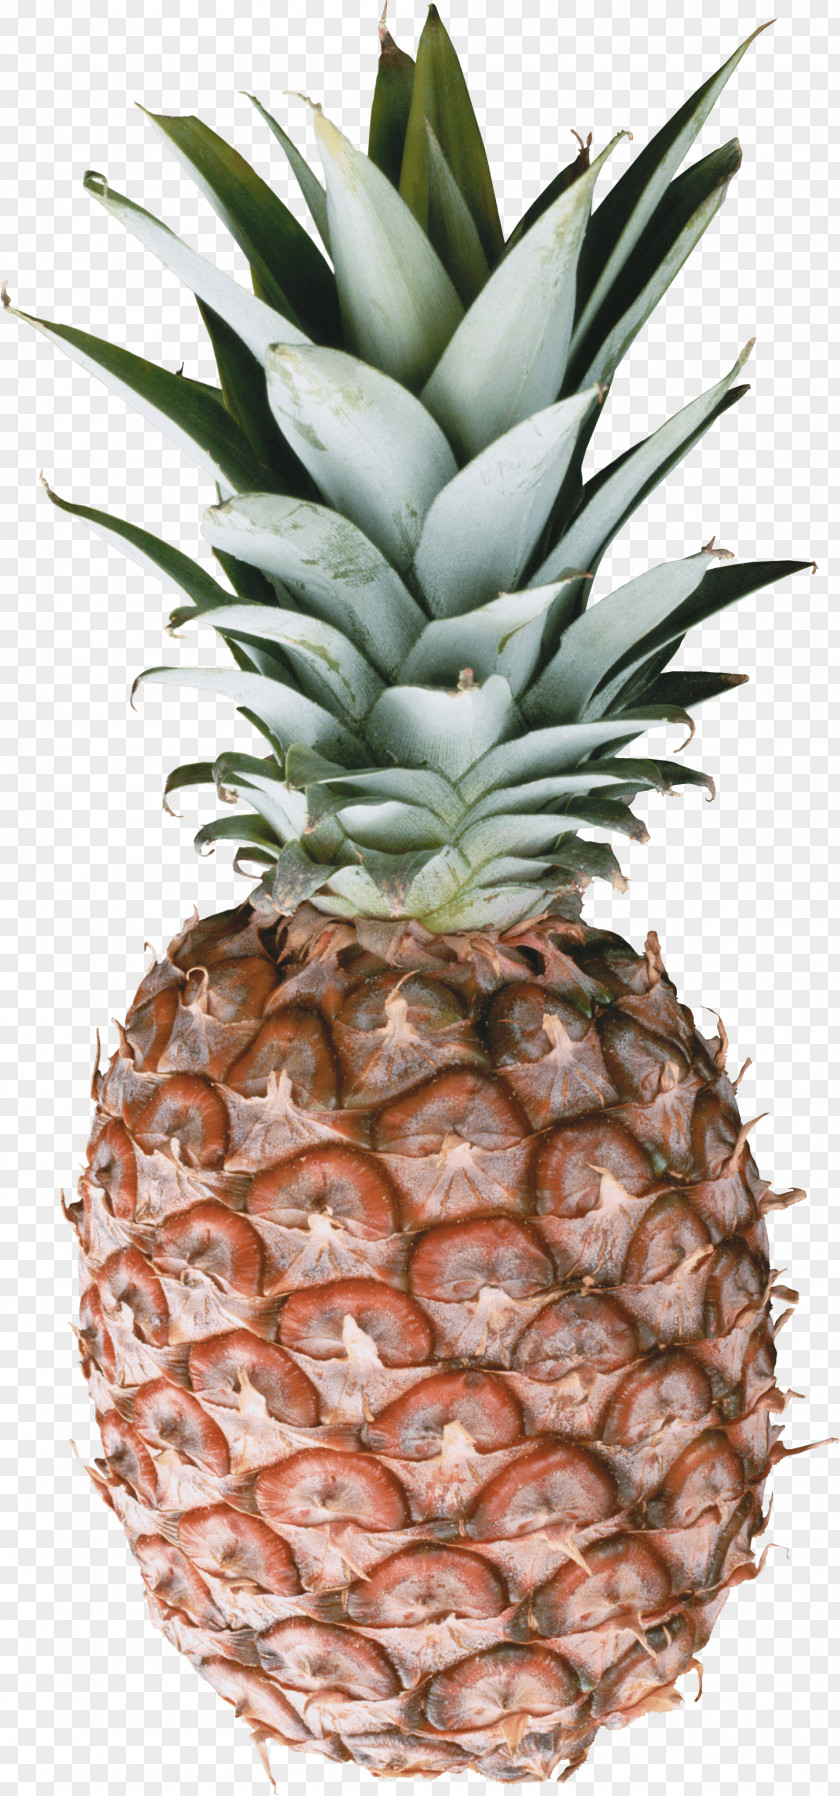 Pineapple Image Download Juice Pizza Sticker Fruit PNG